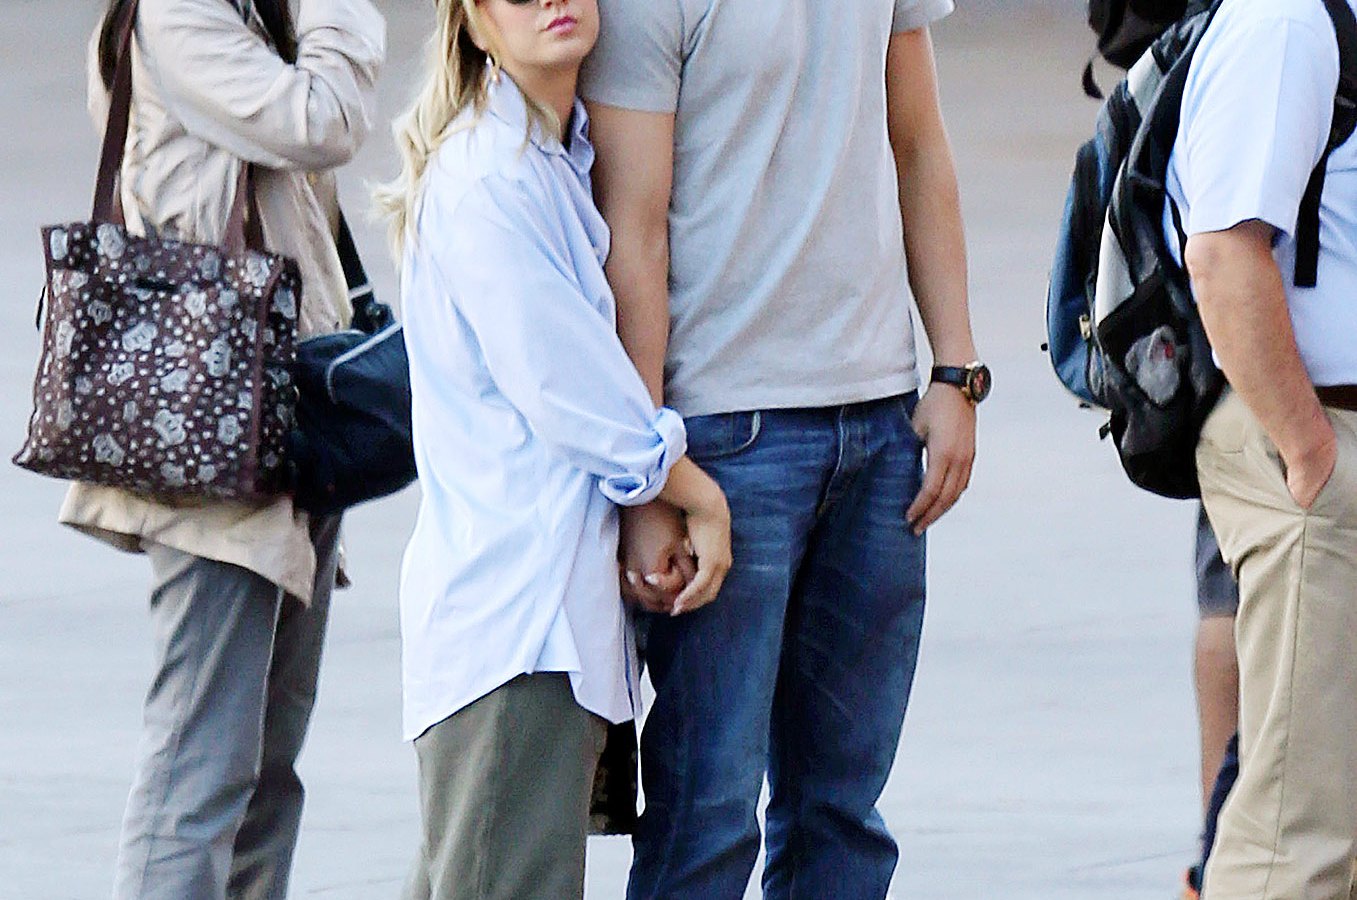 Ryan Sweeting visits Kaley Cuoco on set on October 2, 2013